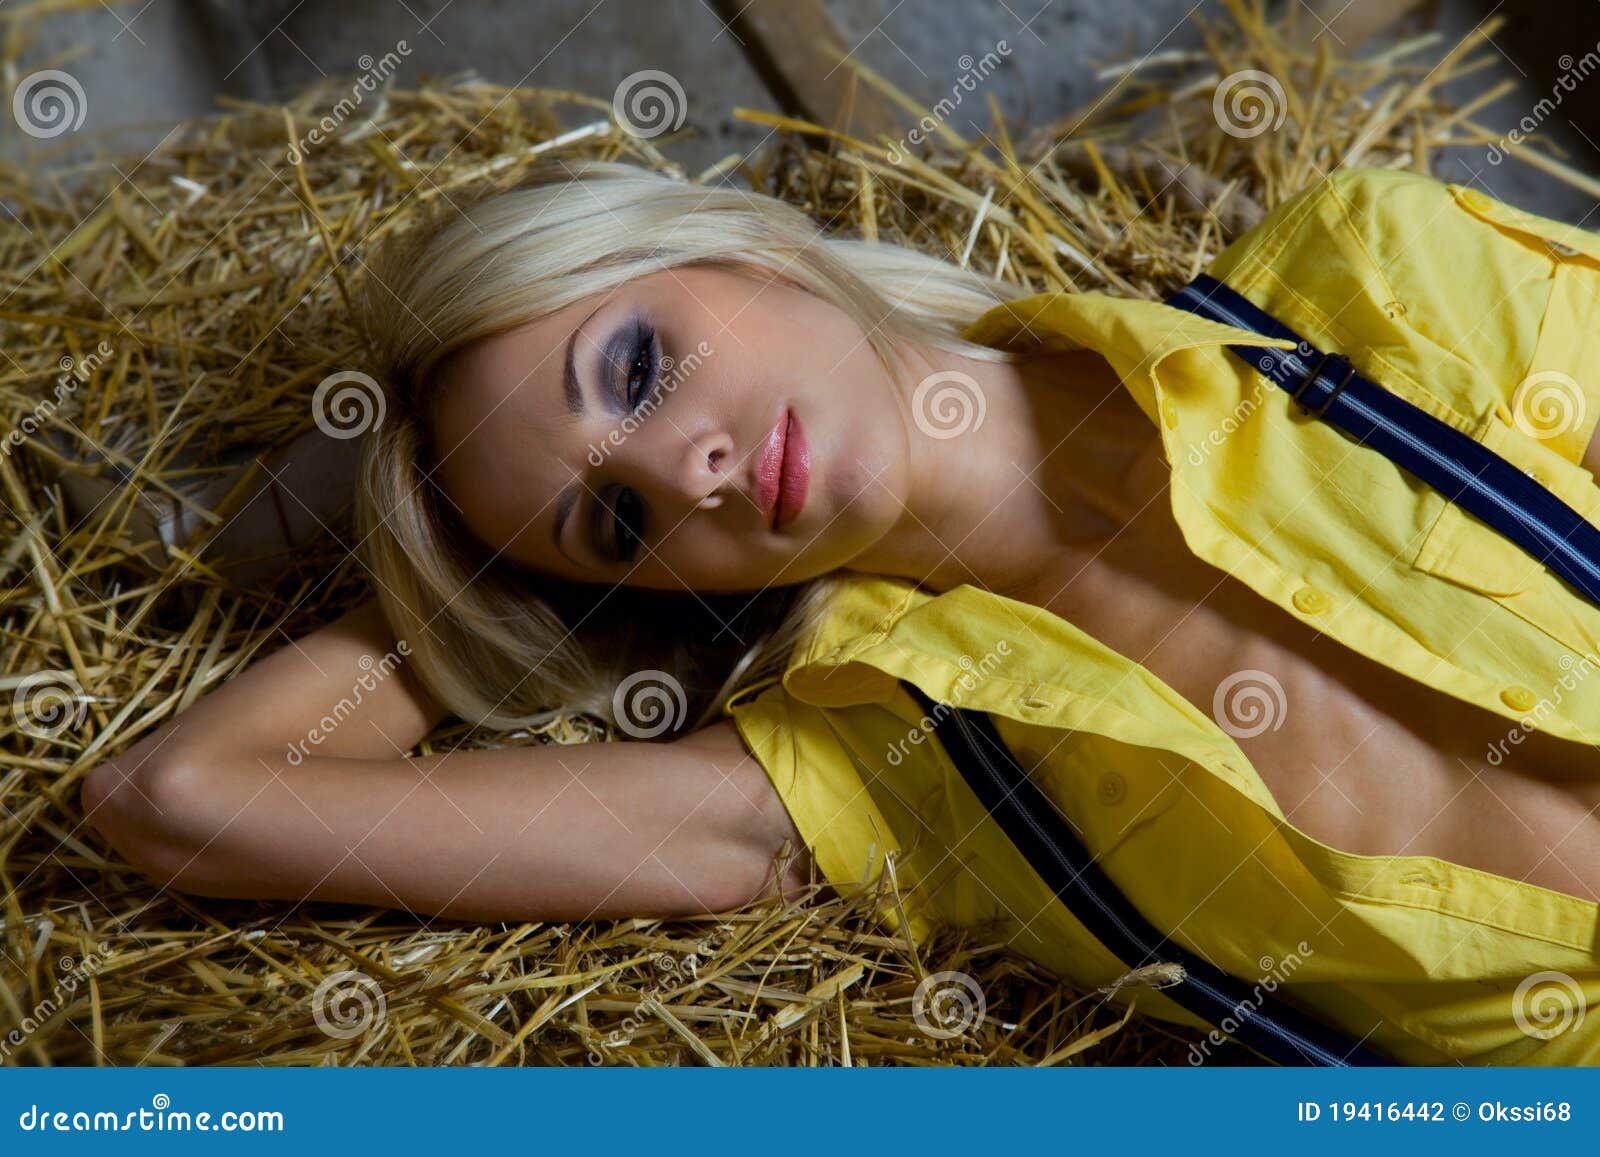 Beautiful Young Nude Woman On Hay Stock Image